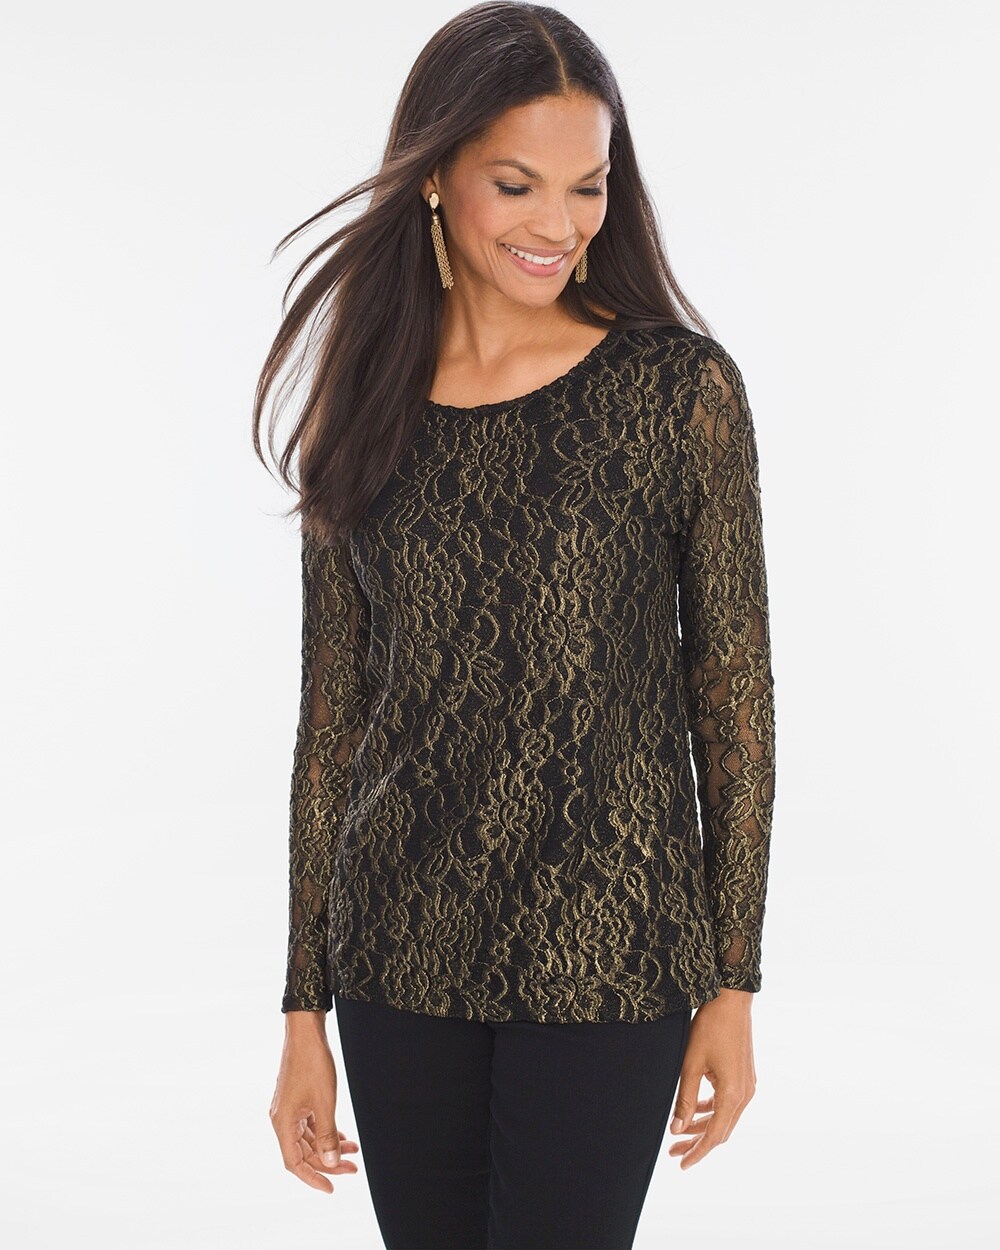 Foiled Lace Top